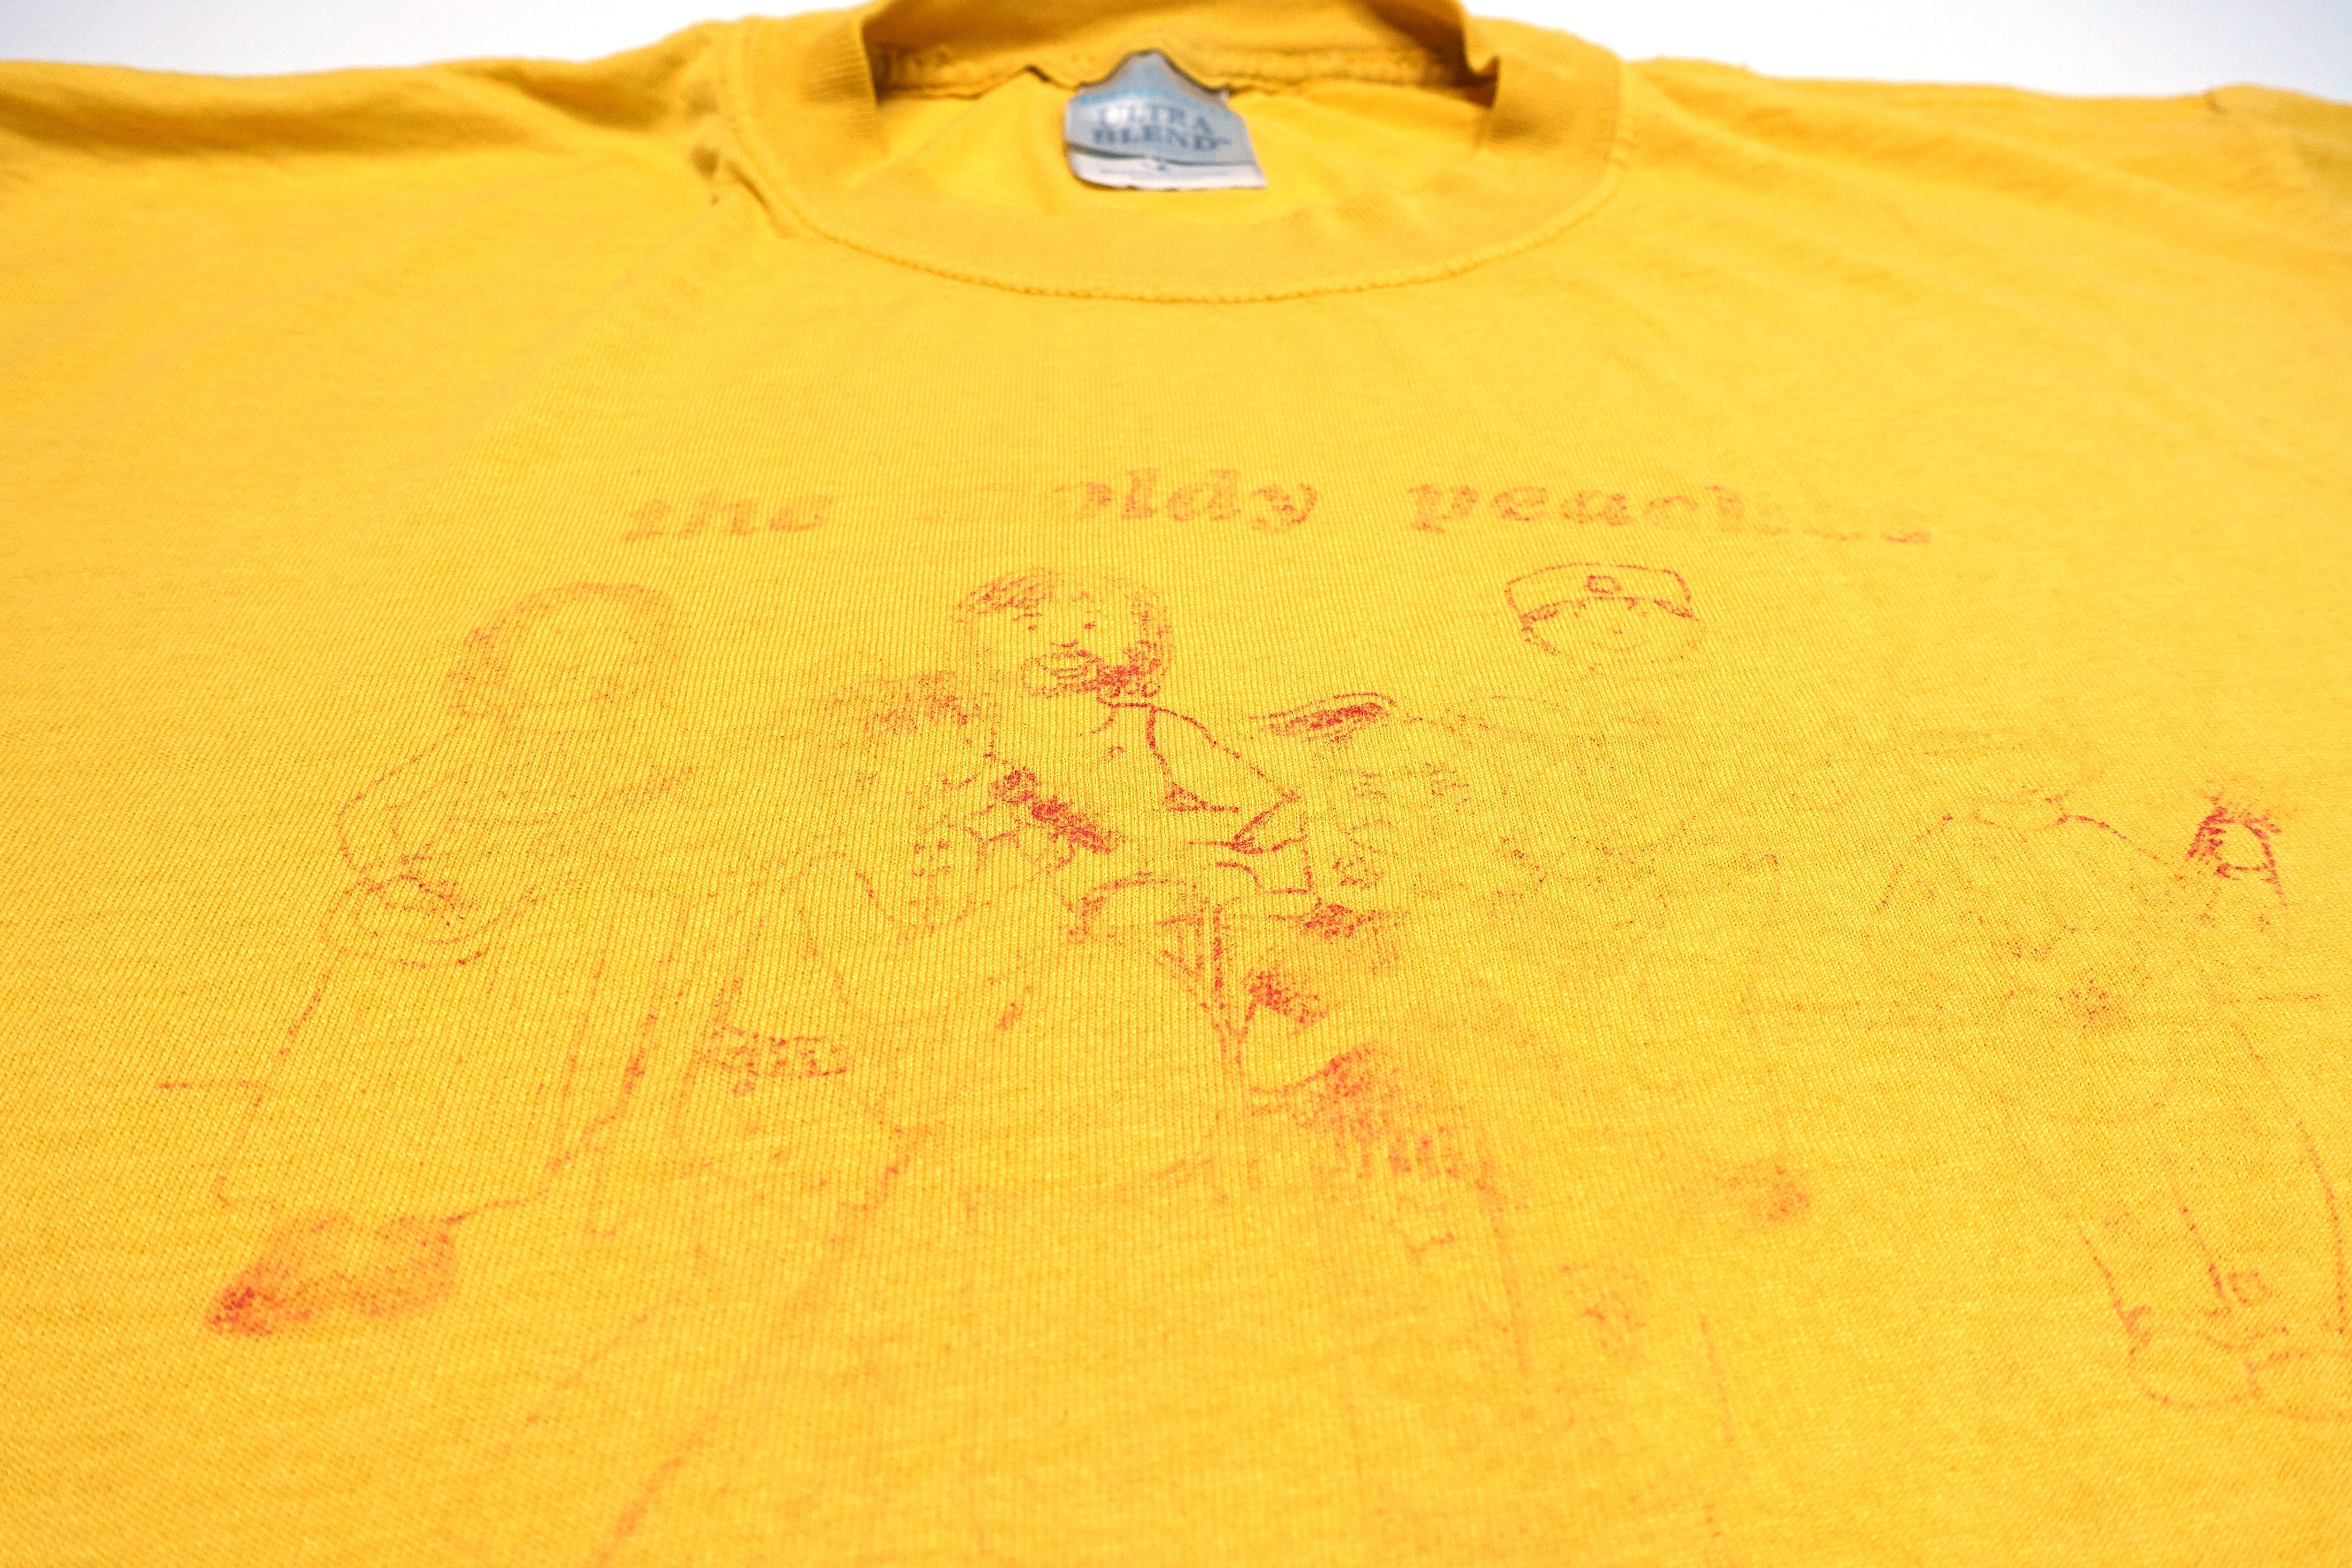 Moldy Peaches – One Good Tour Deserves Another 2002 Tour Shirt Size Large